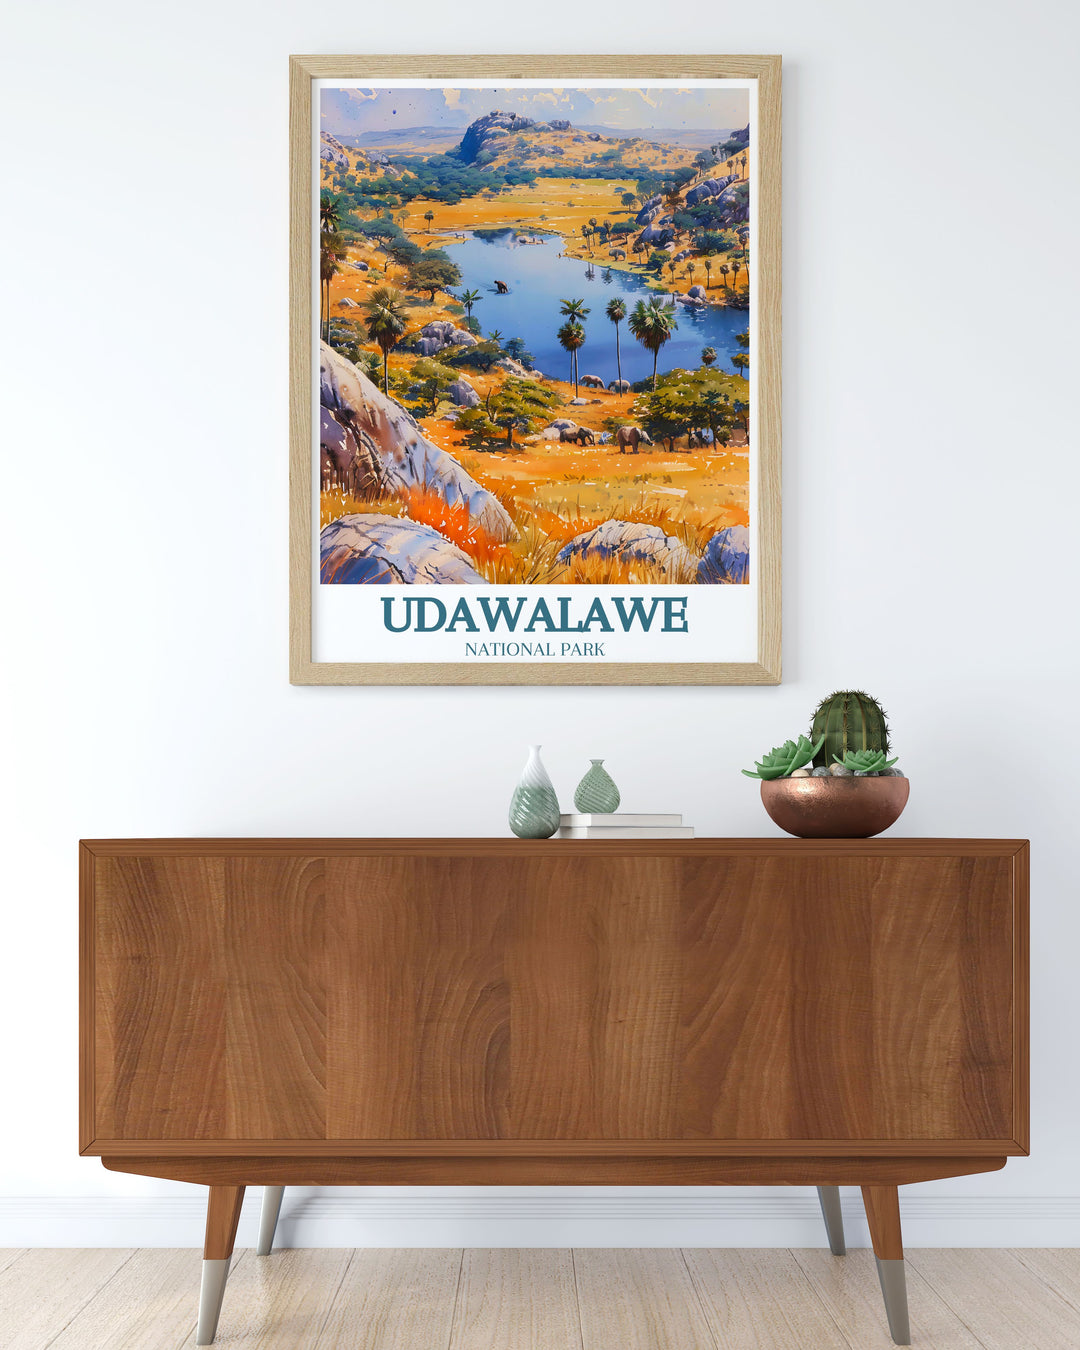 Udawalawe Reservoir Walawe River framed print perfect for adding a touch of elegance and adventure to your home or office decor with its detailed depiction of Sri Lankas picturesque landscapes and vibrant wildlife.